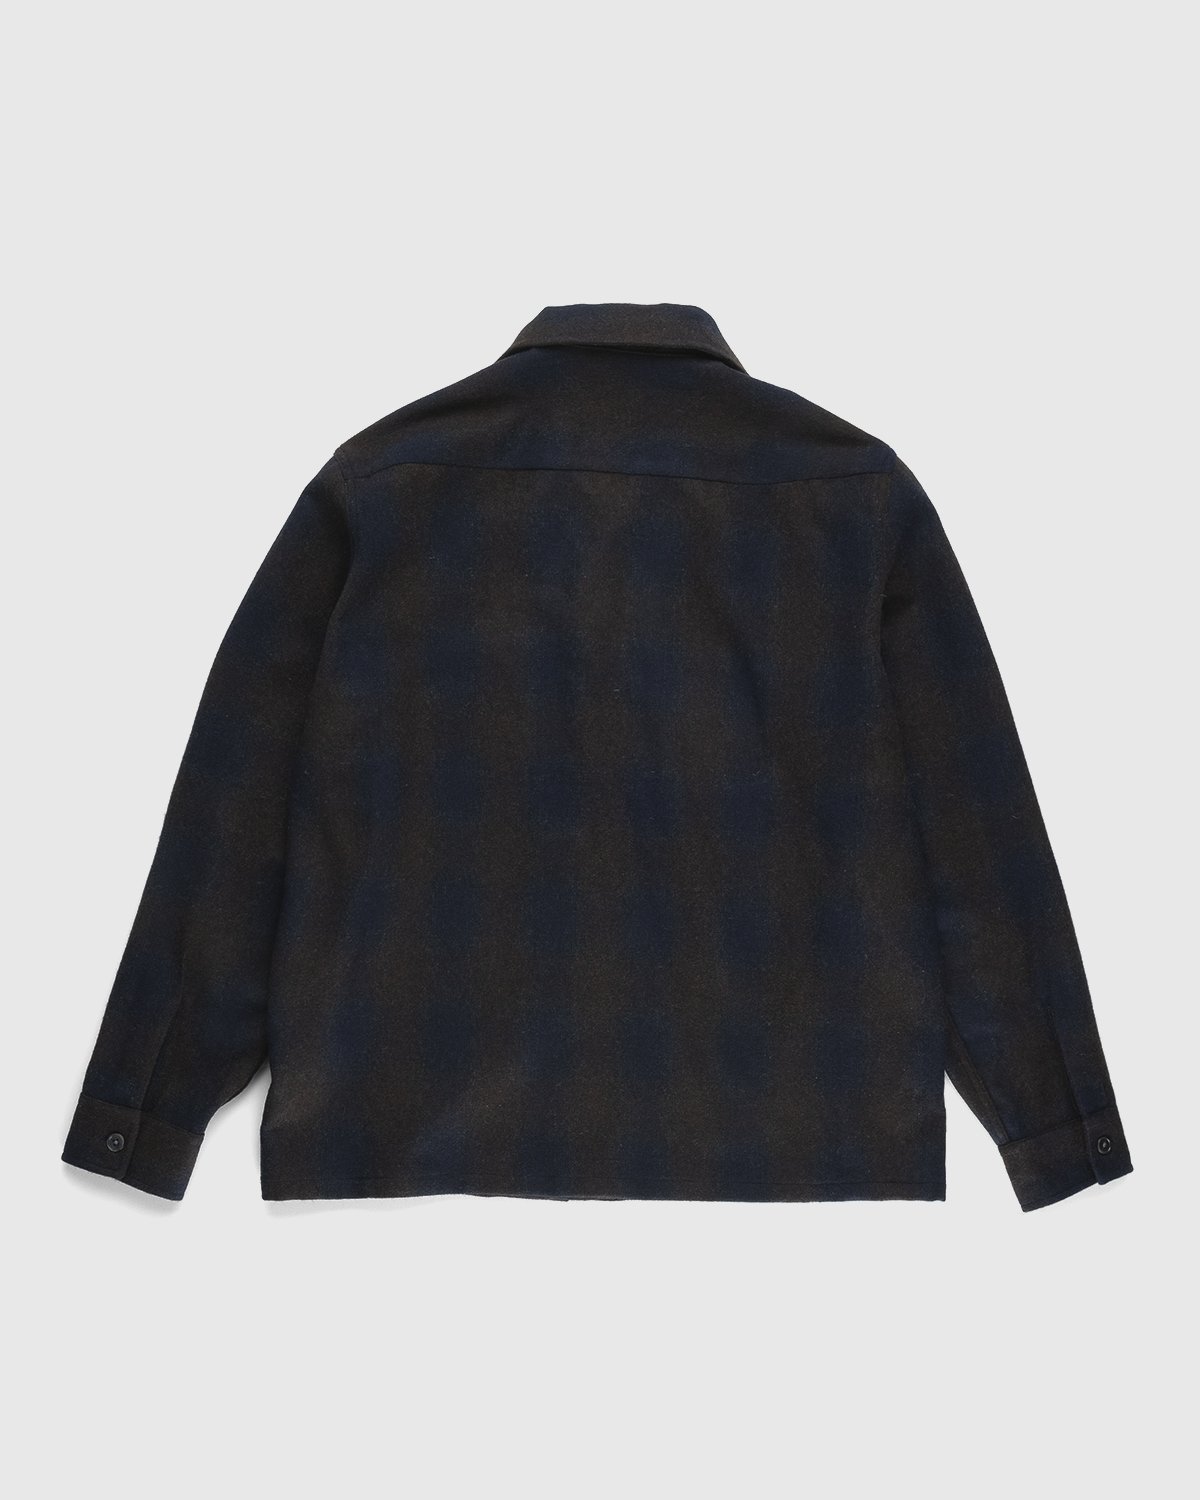 Our Legacy - Heusen Shirt Navy Shadow Check - Clothing - Blue - Image 2